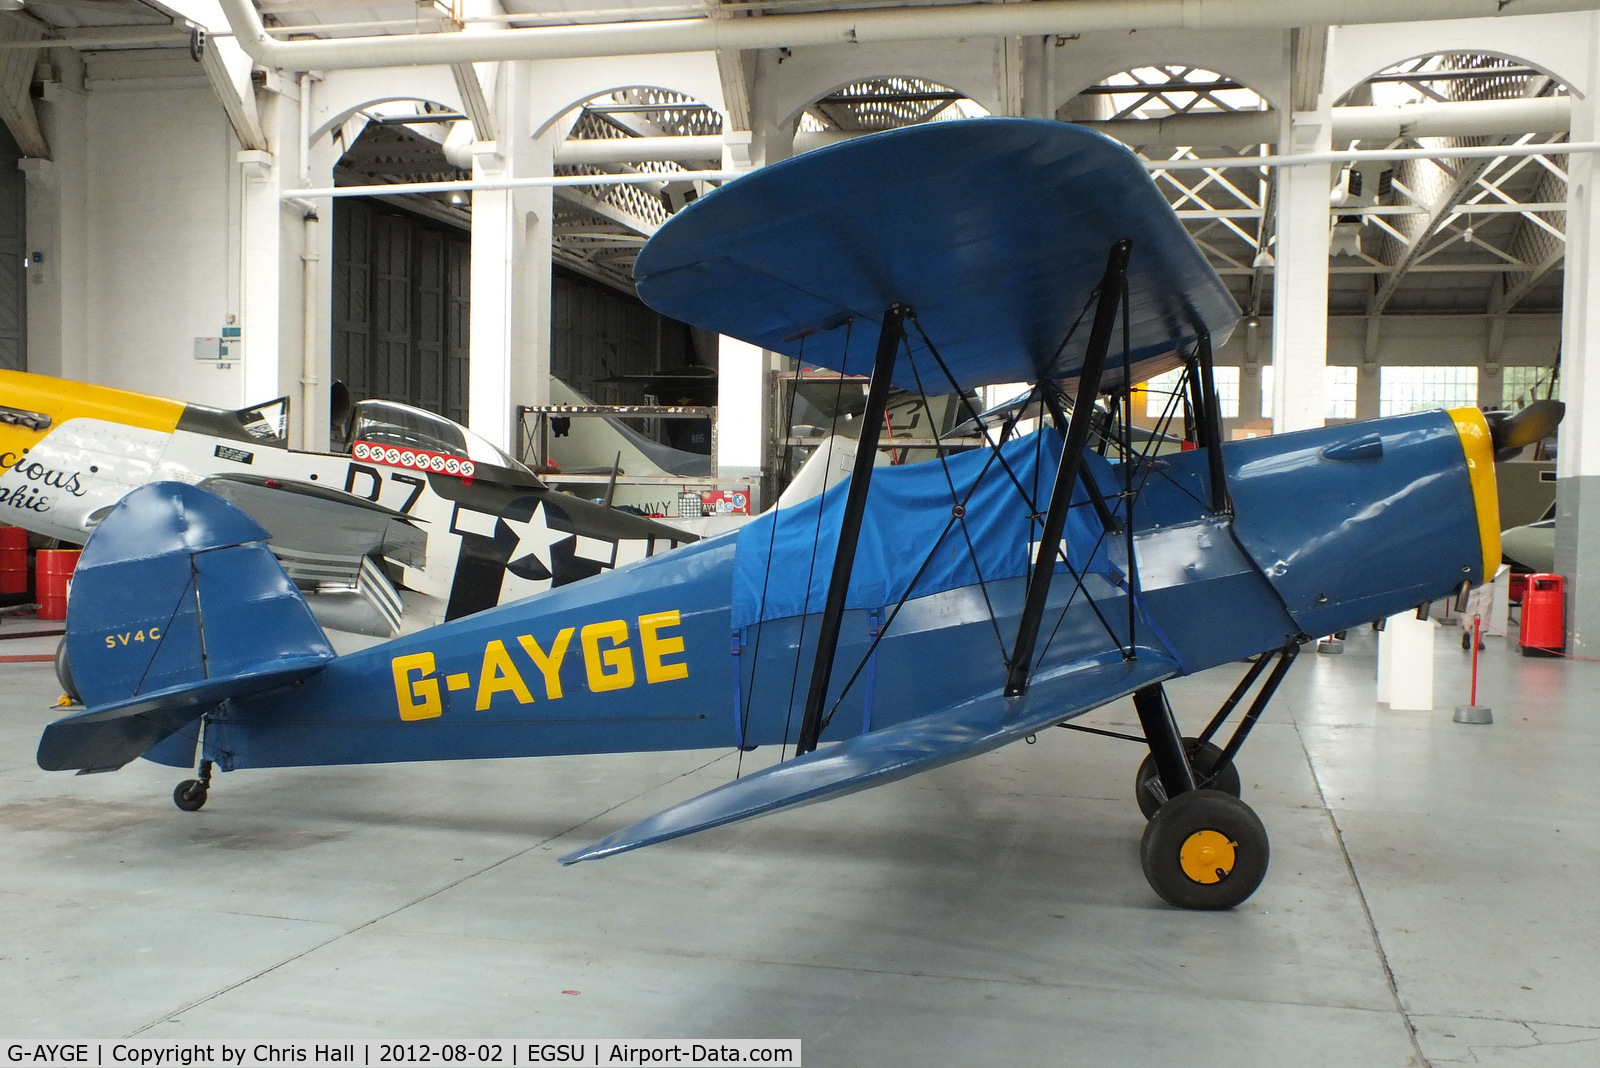 G-AYGE, 1946 Stampe-Vertongen SV-4C C/N 242, privately owned